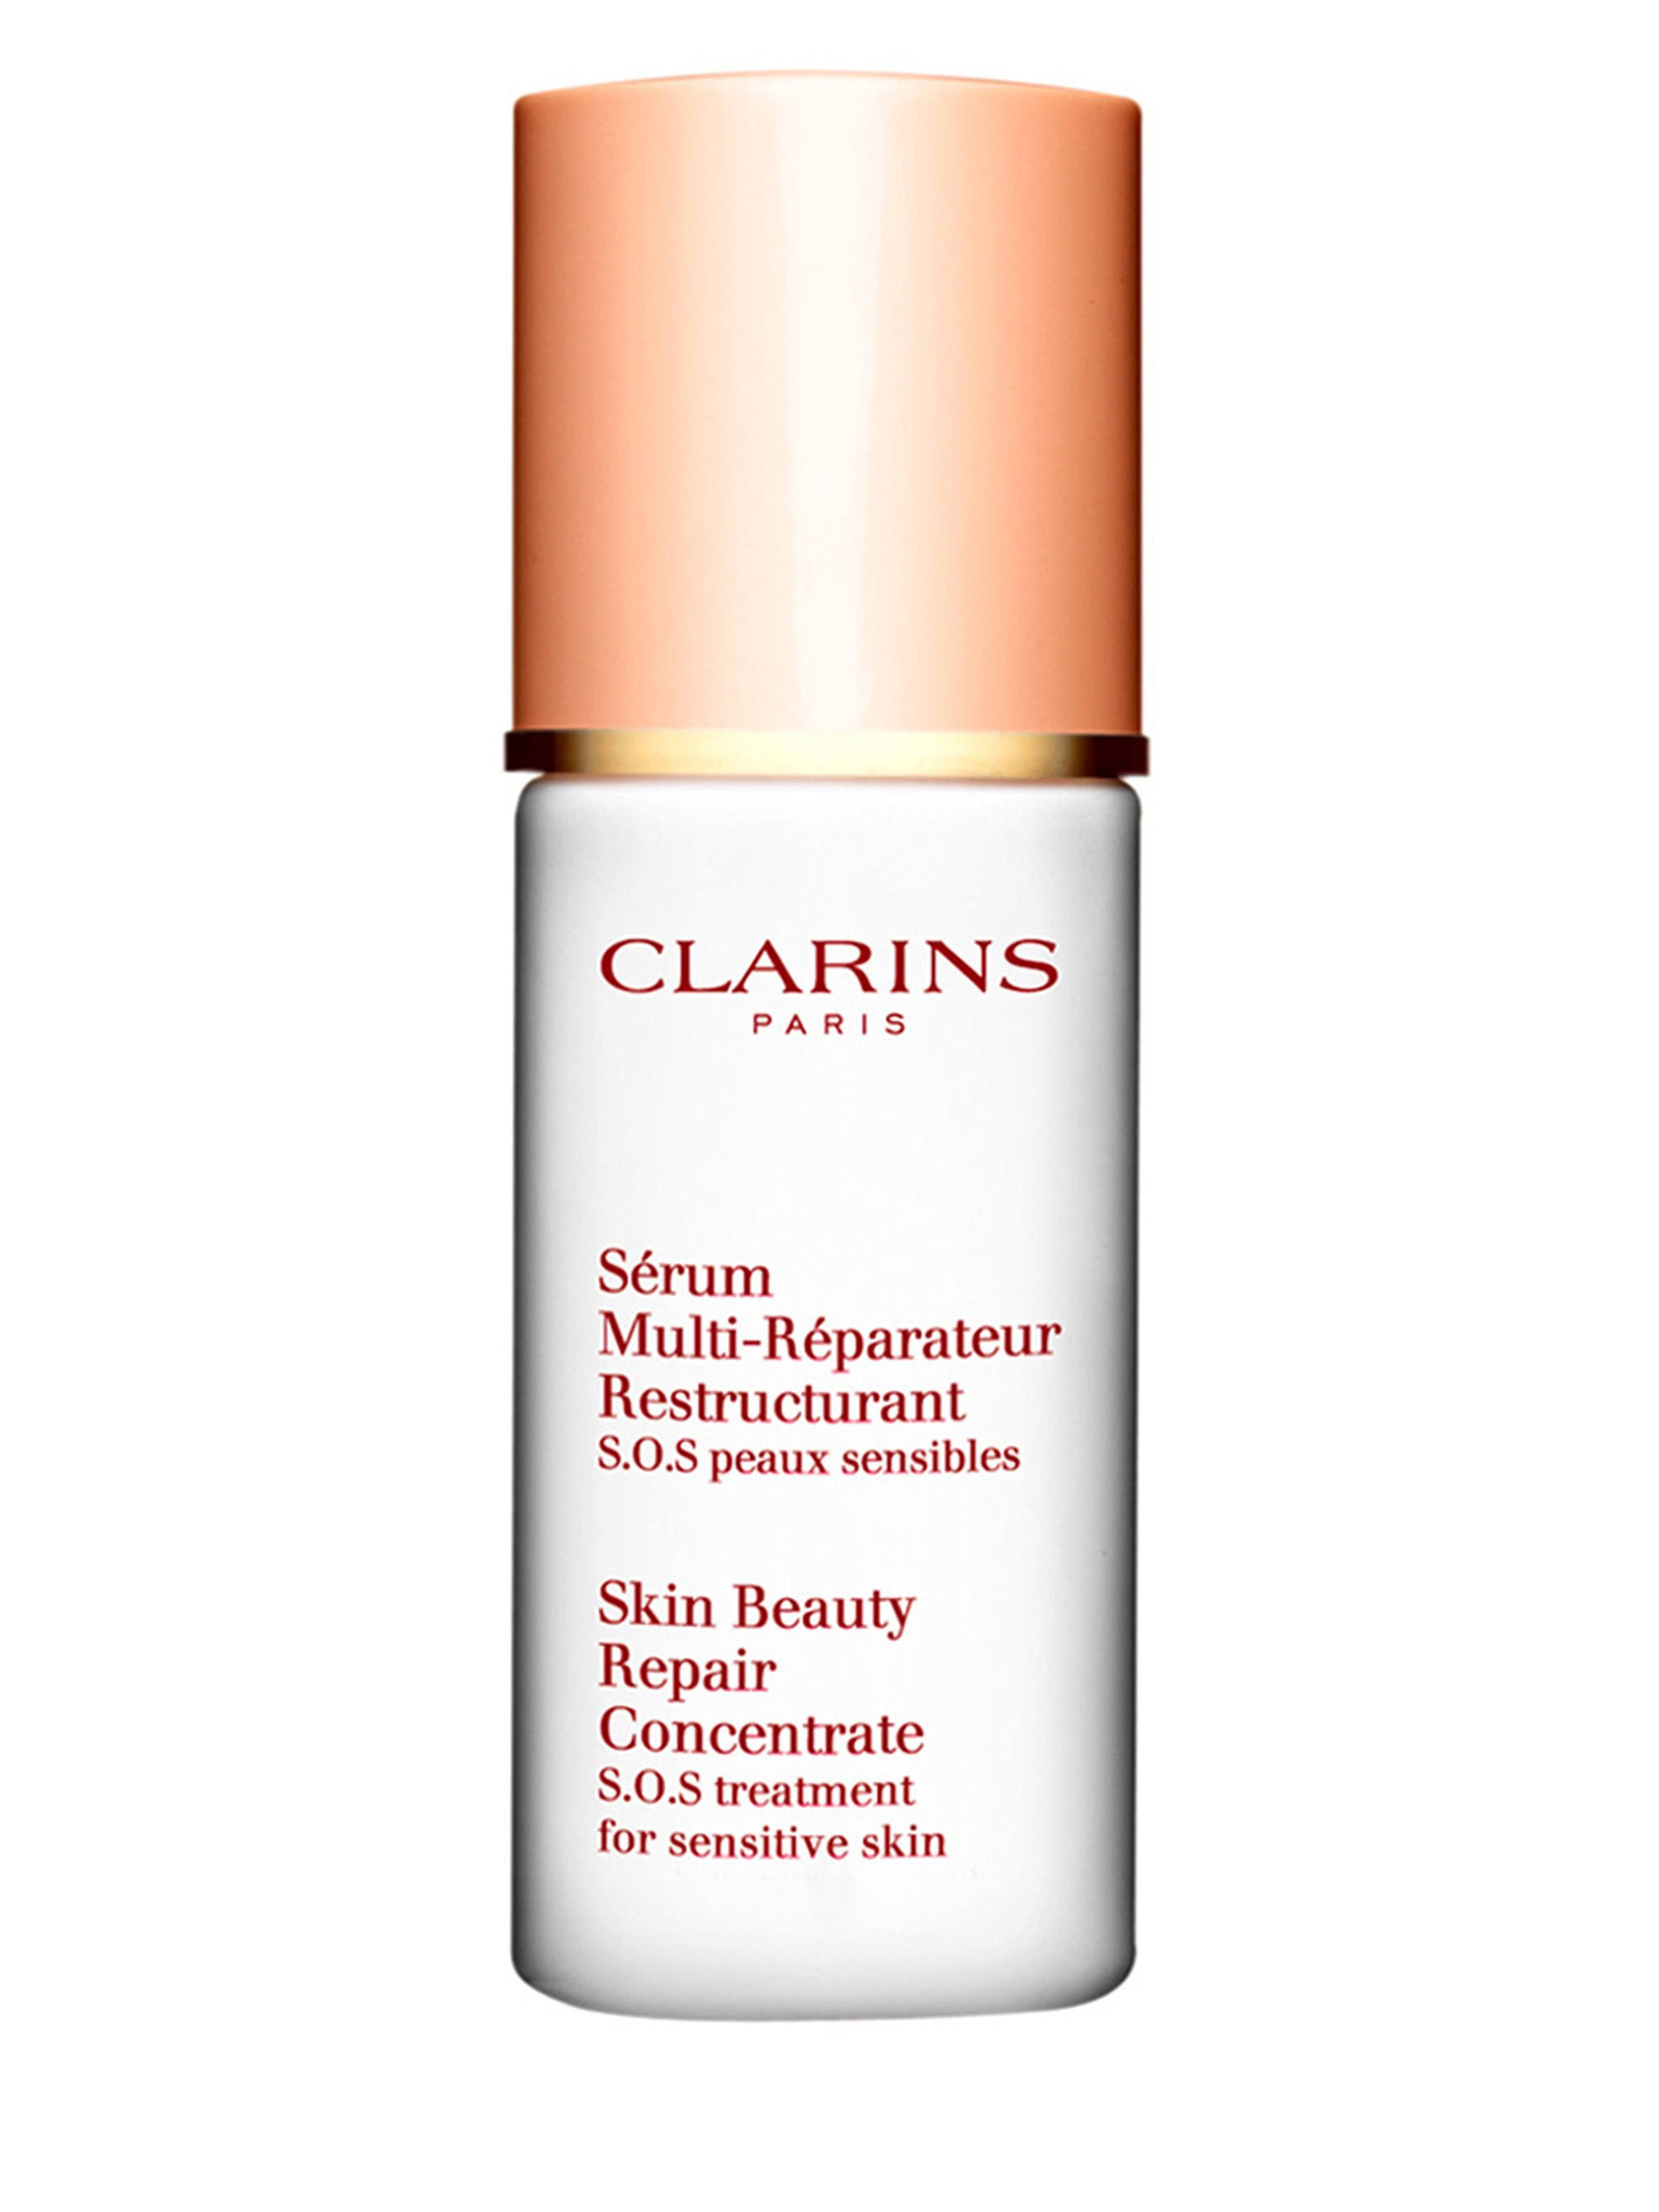 Clarins Skin Beauty Repair Concentrate - 15ml